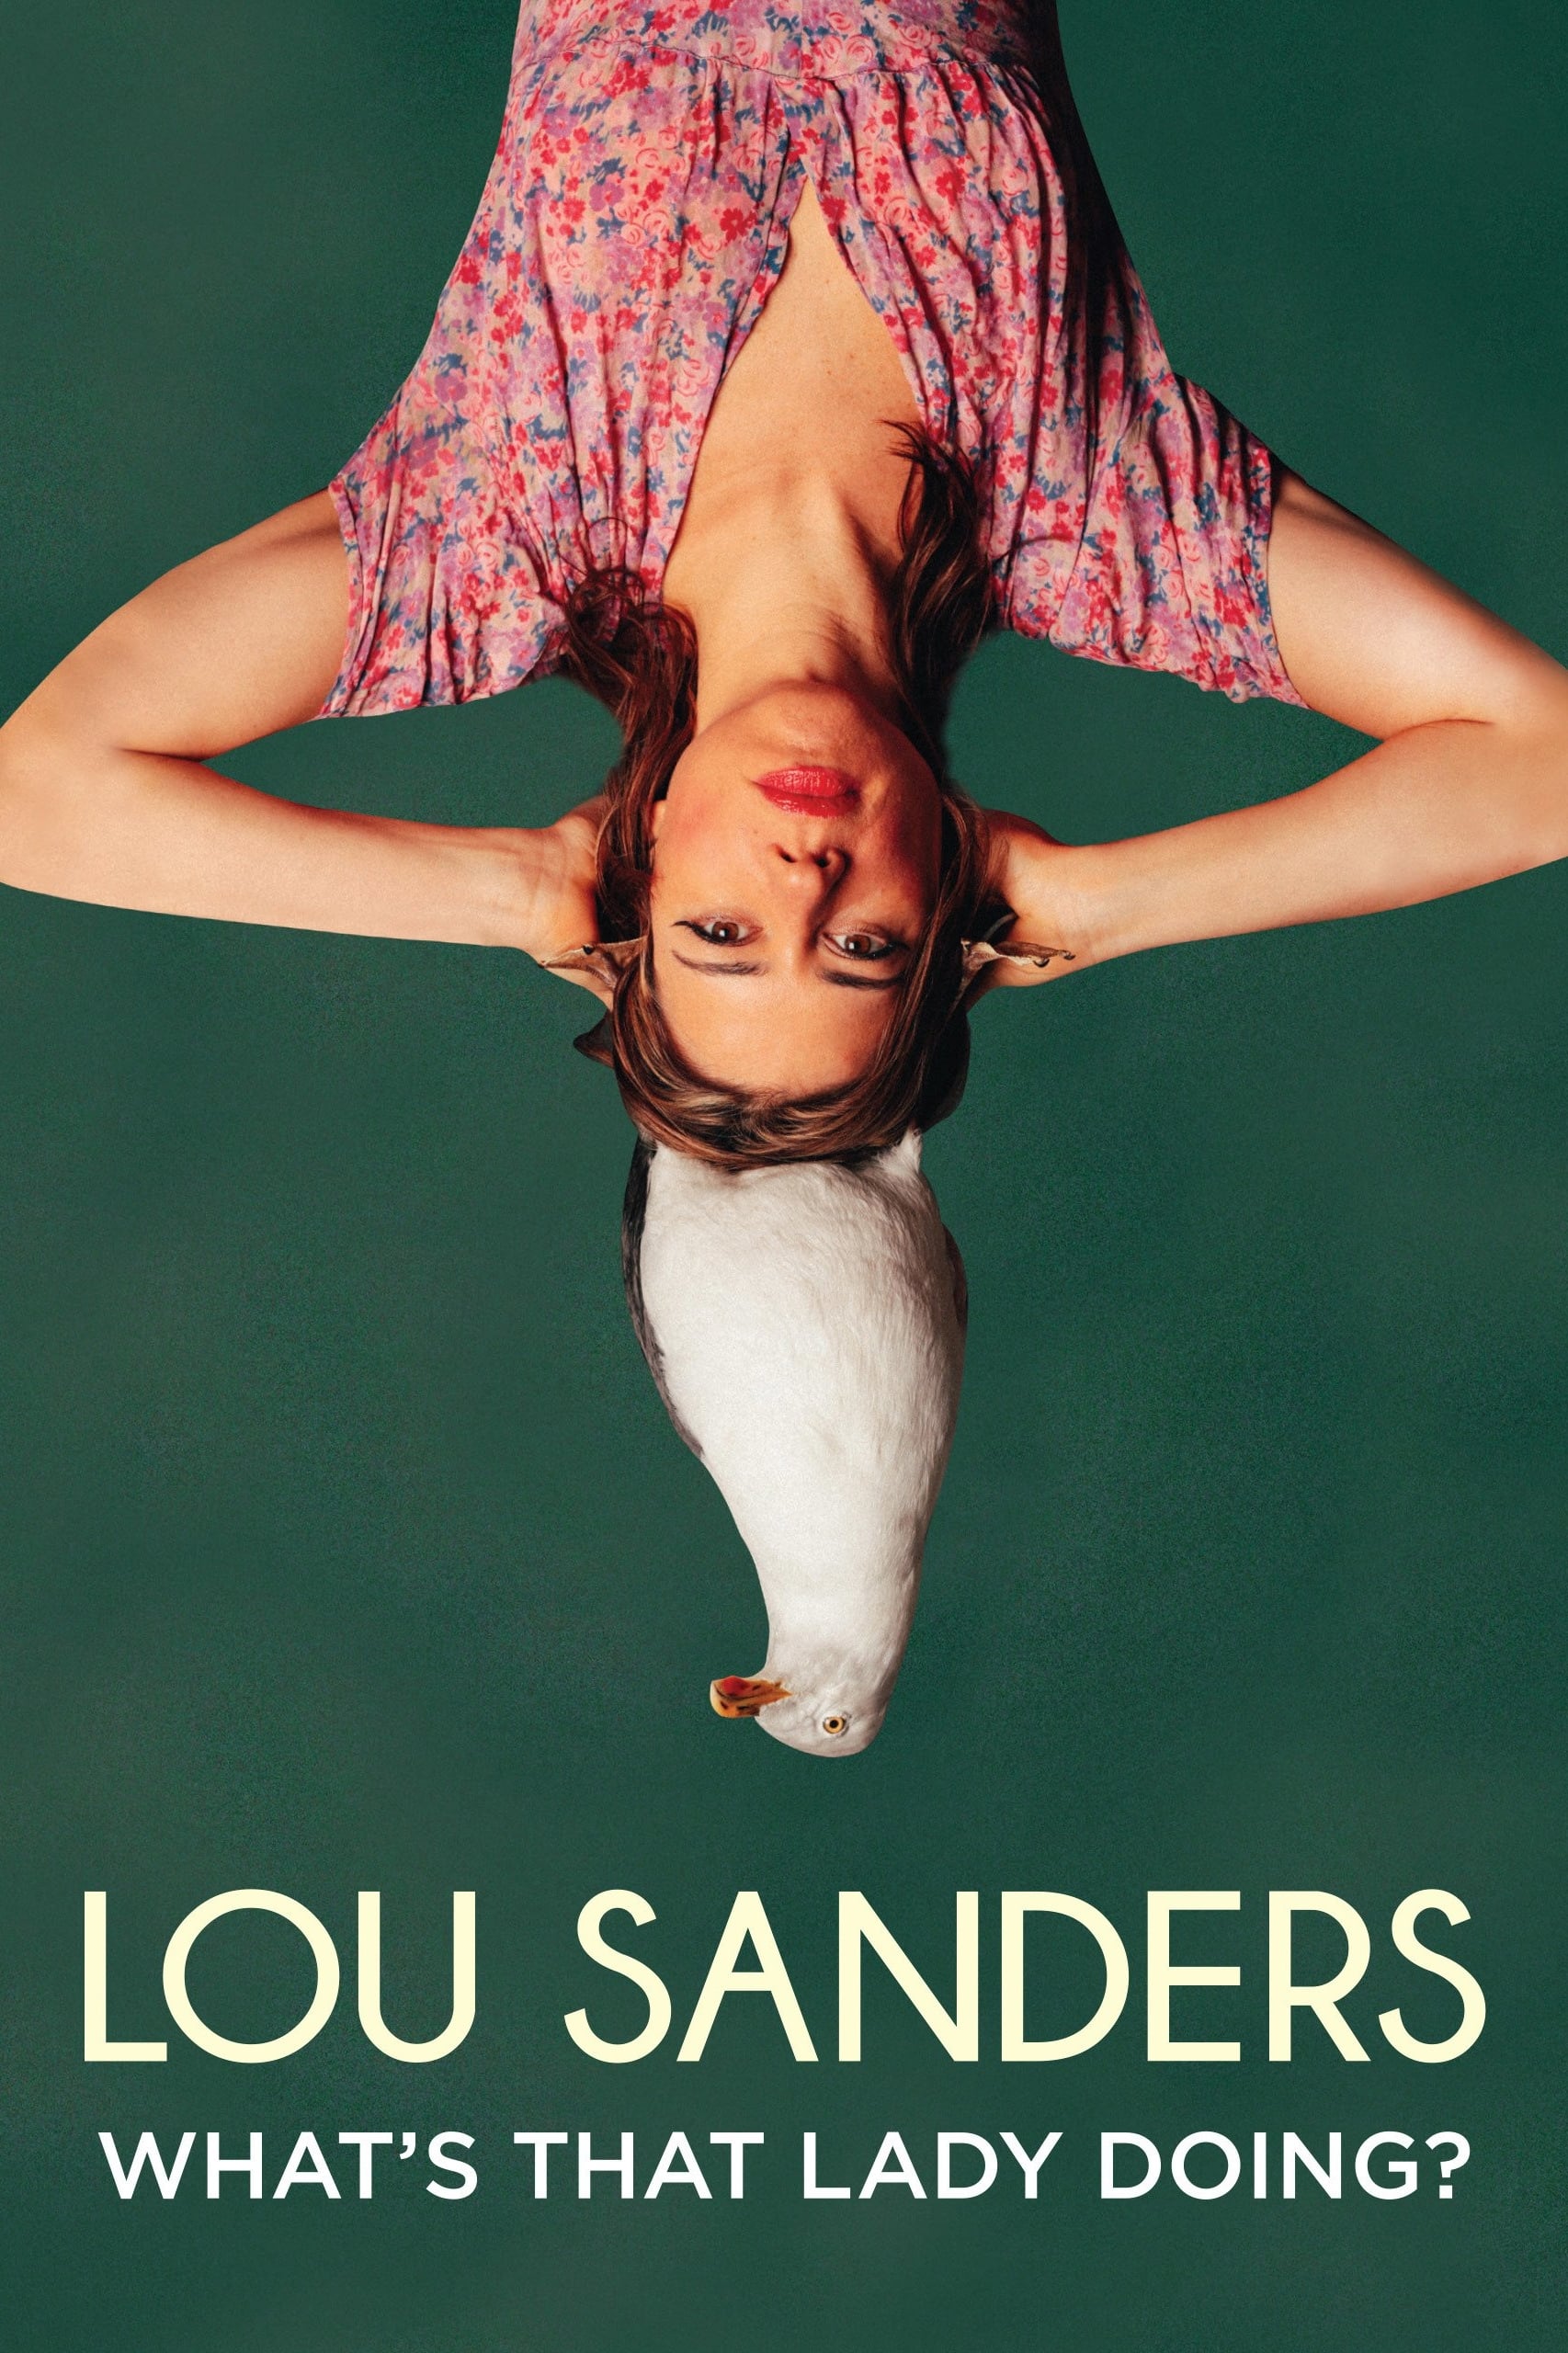 Lou Sanders: What's That Lady Doing?